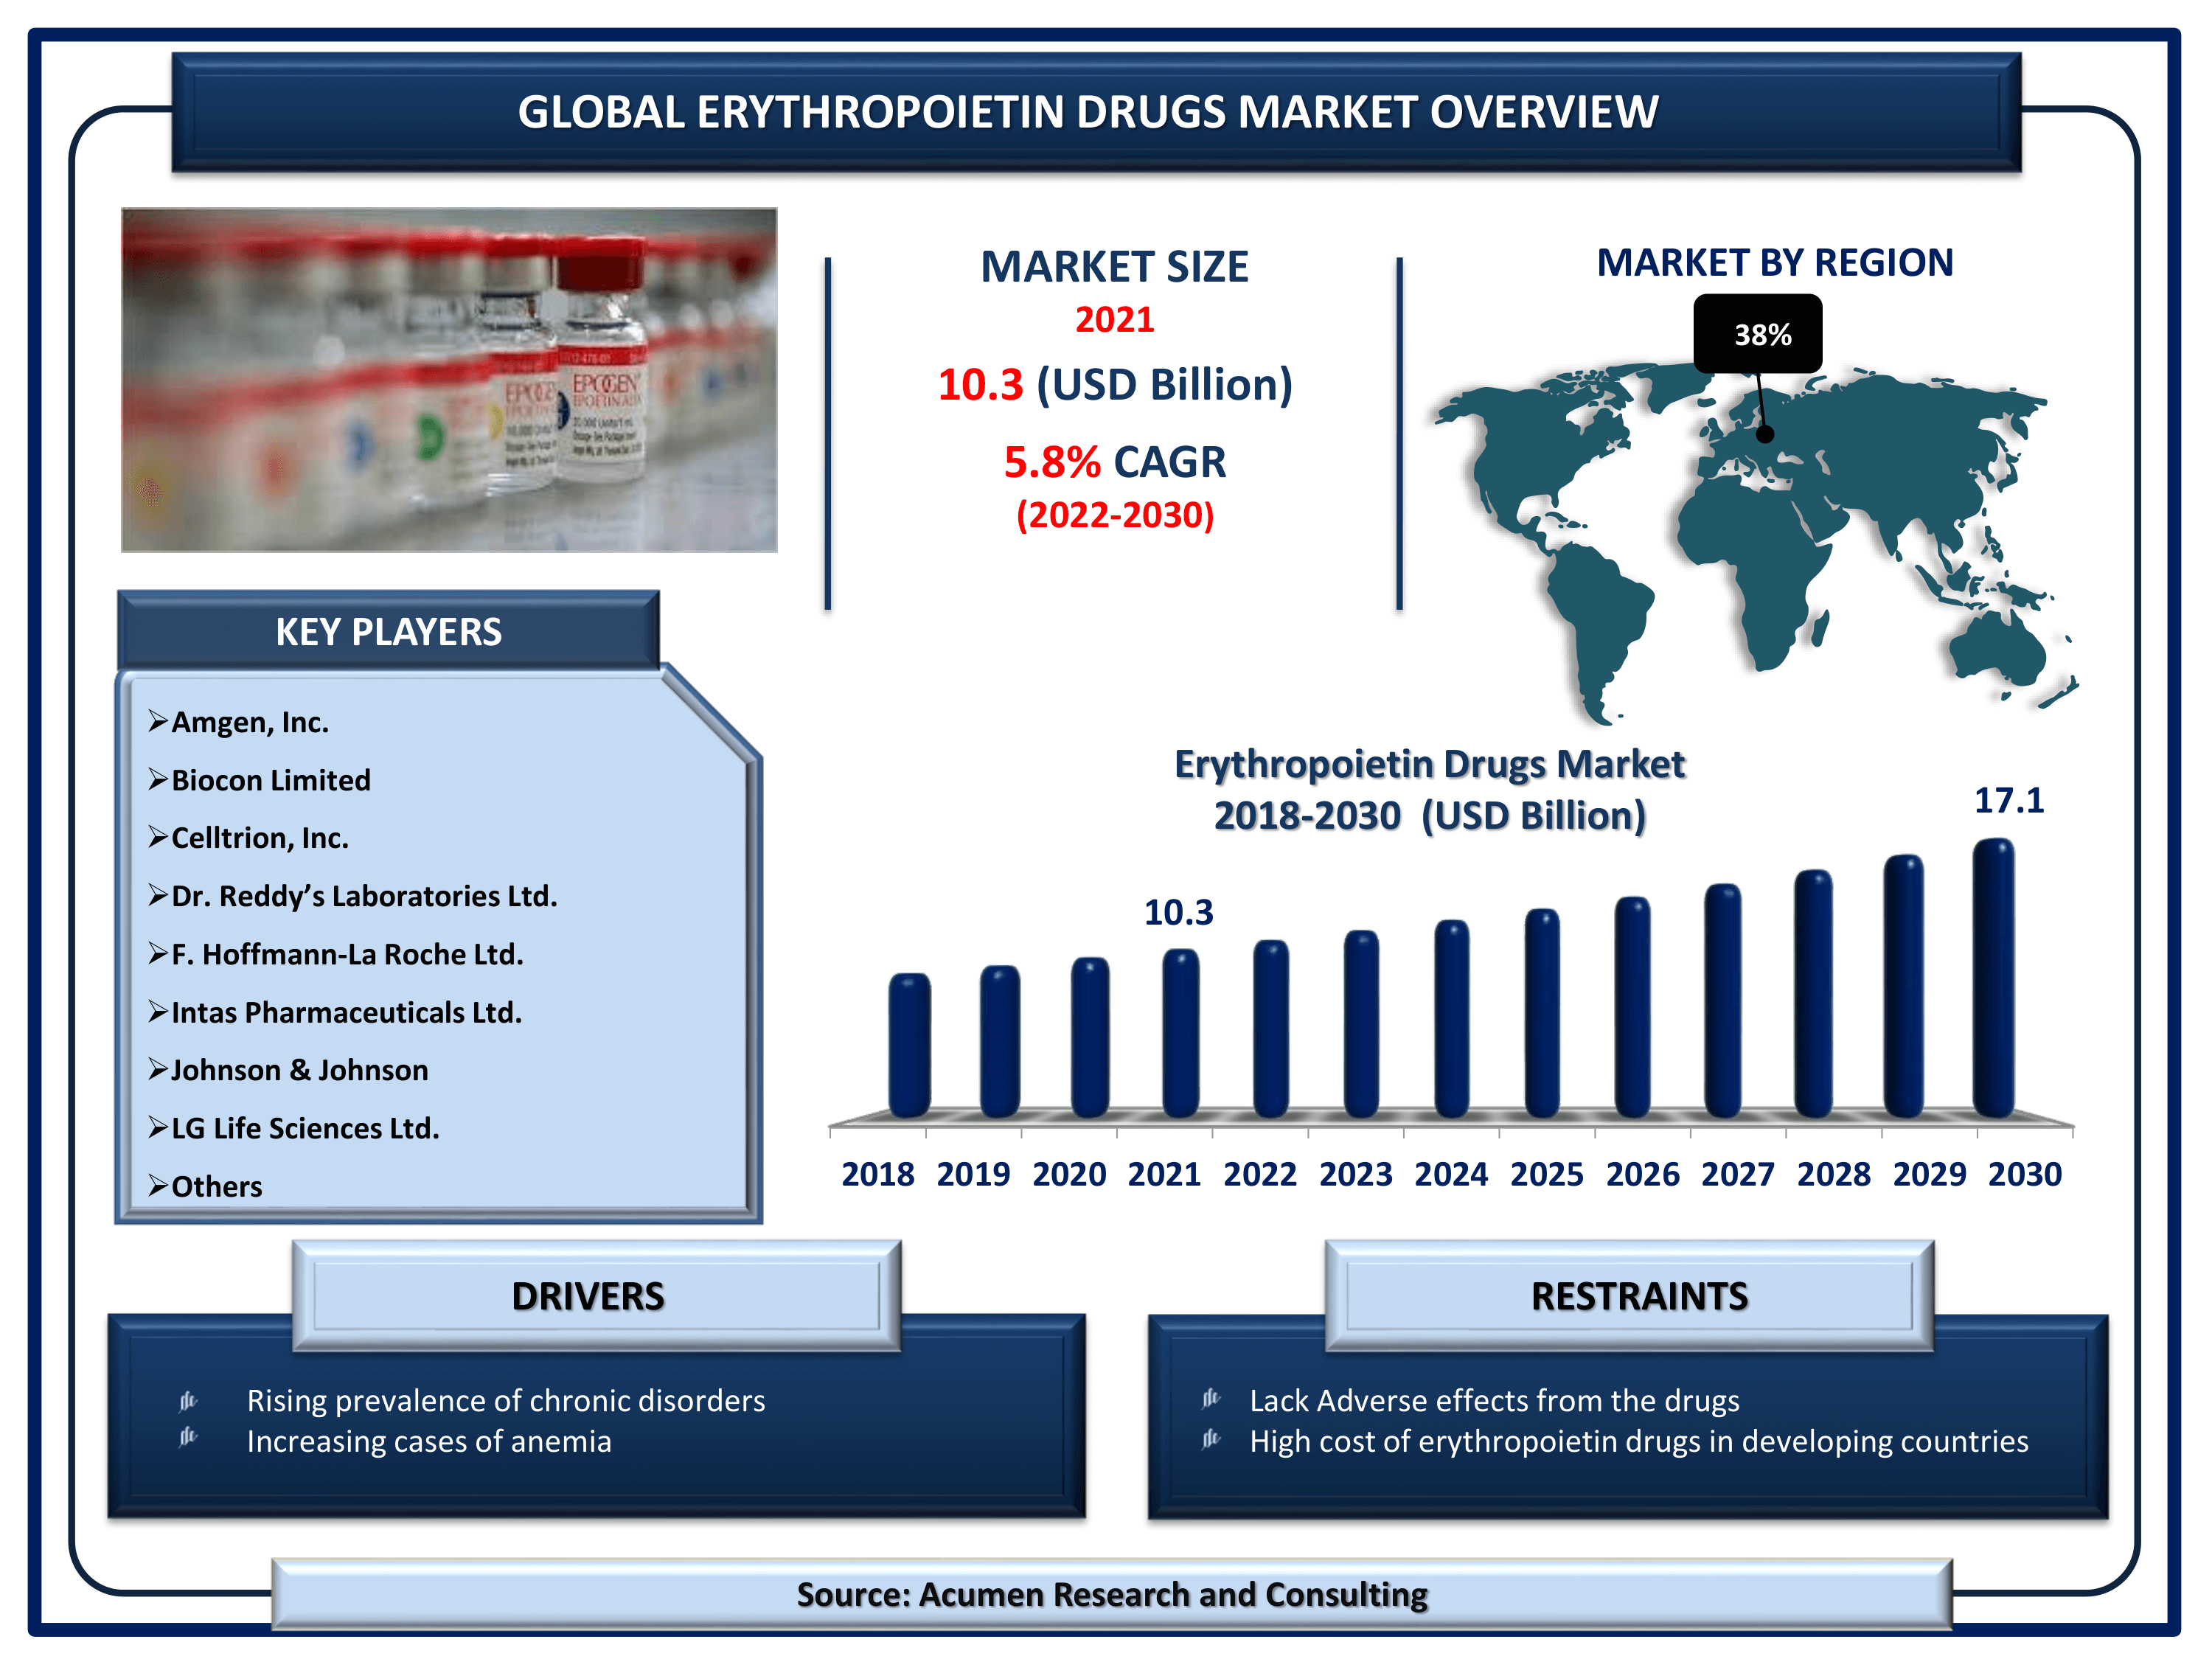 Global erythropoietin drugs market revenue is estimated to reach USD 17.1 Billion by 2030 with a CAGR of 5.8% from 2022 to 2030